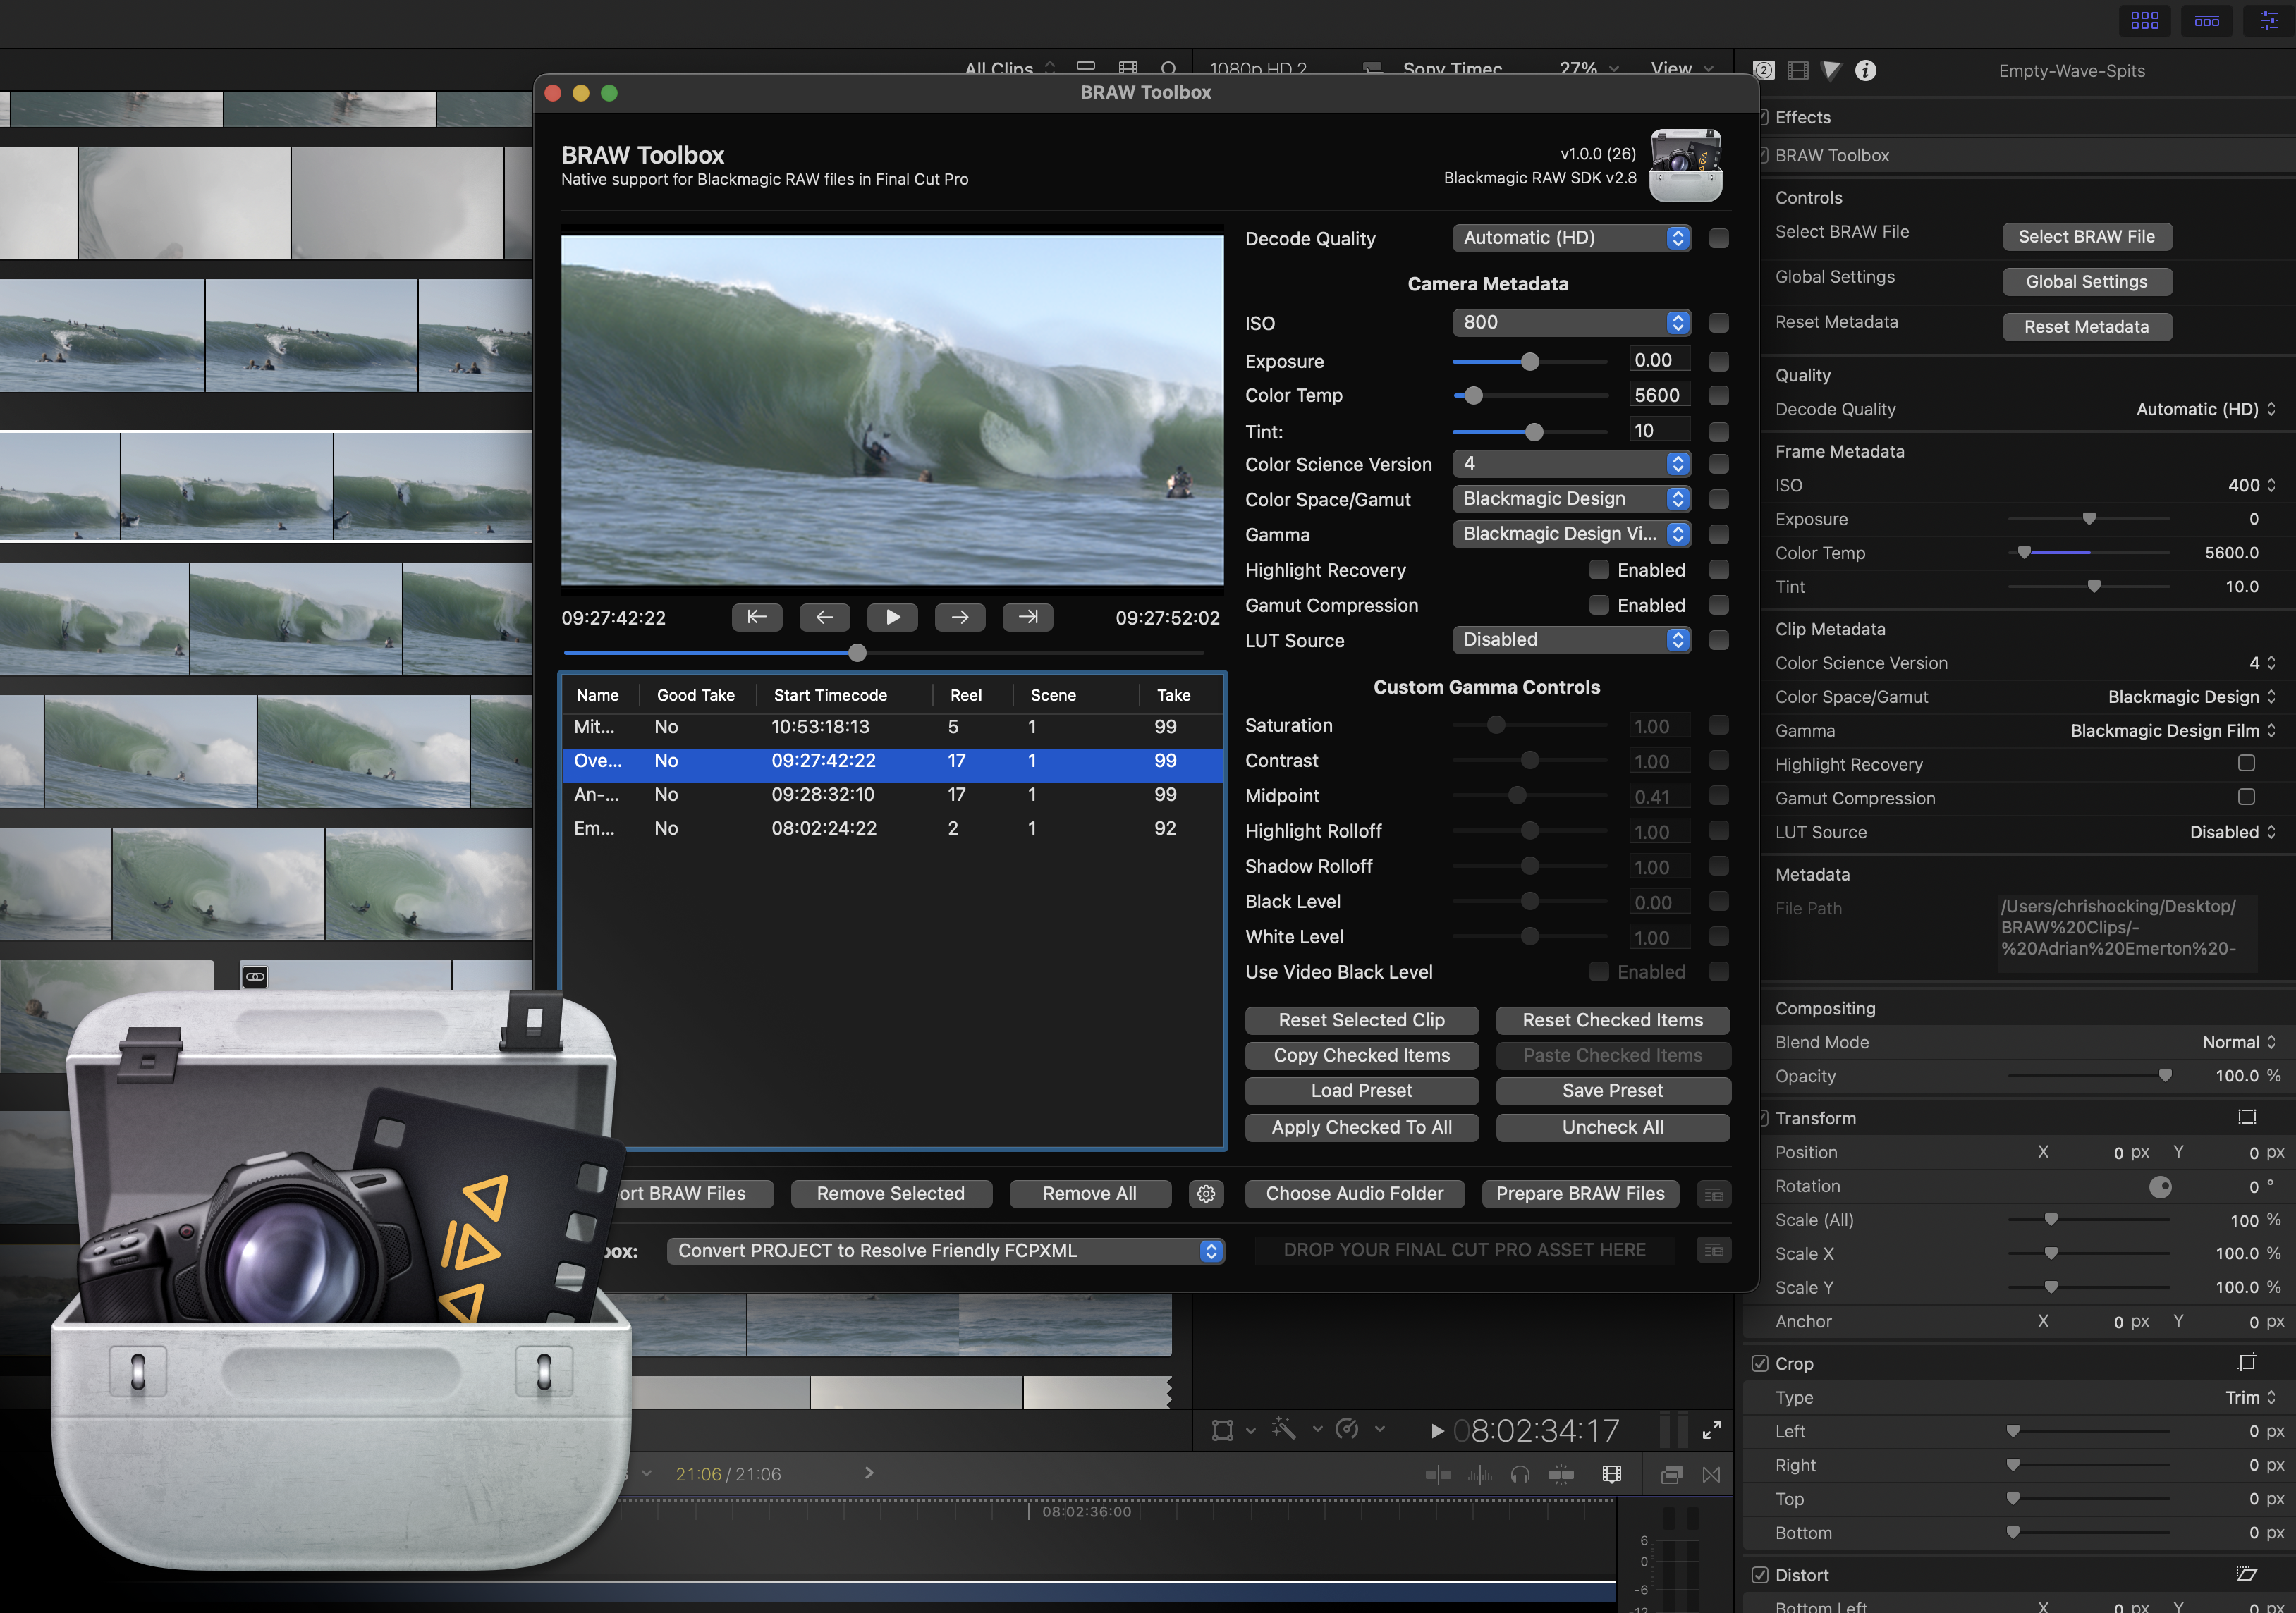 Screenshot of BRAW Toolbox in Action. Surf footage by Adrian Emerton.